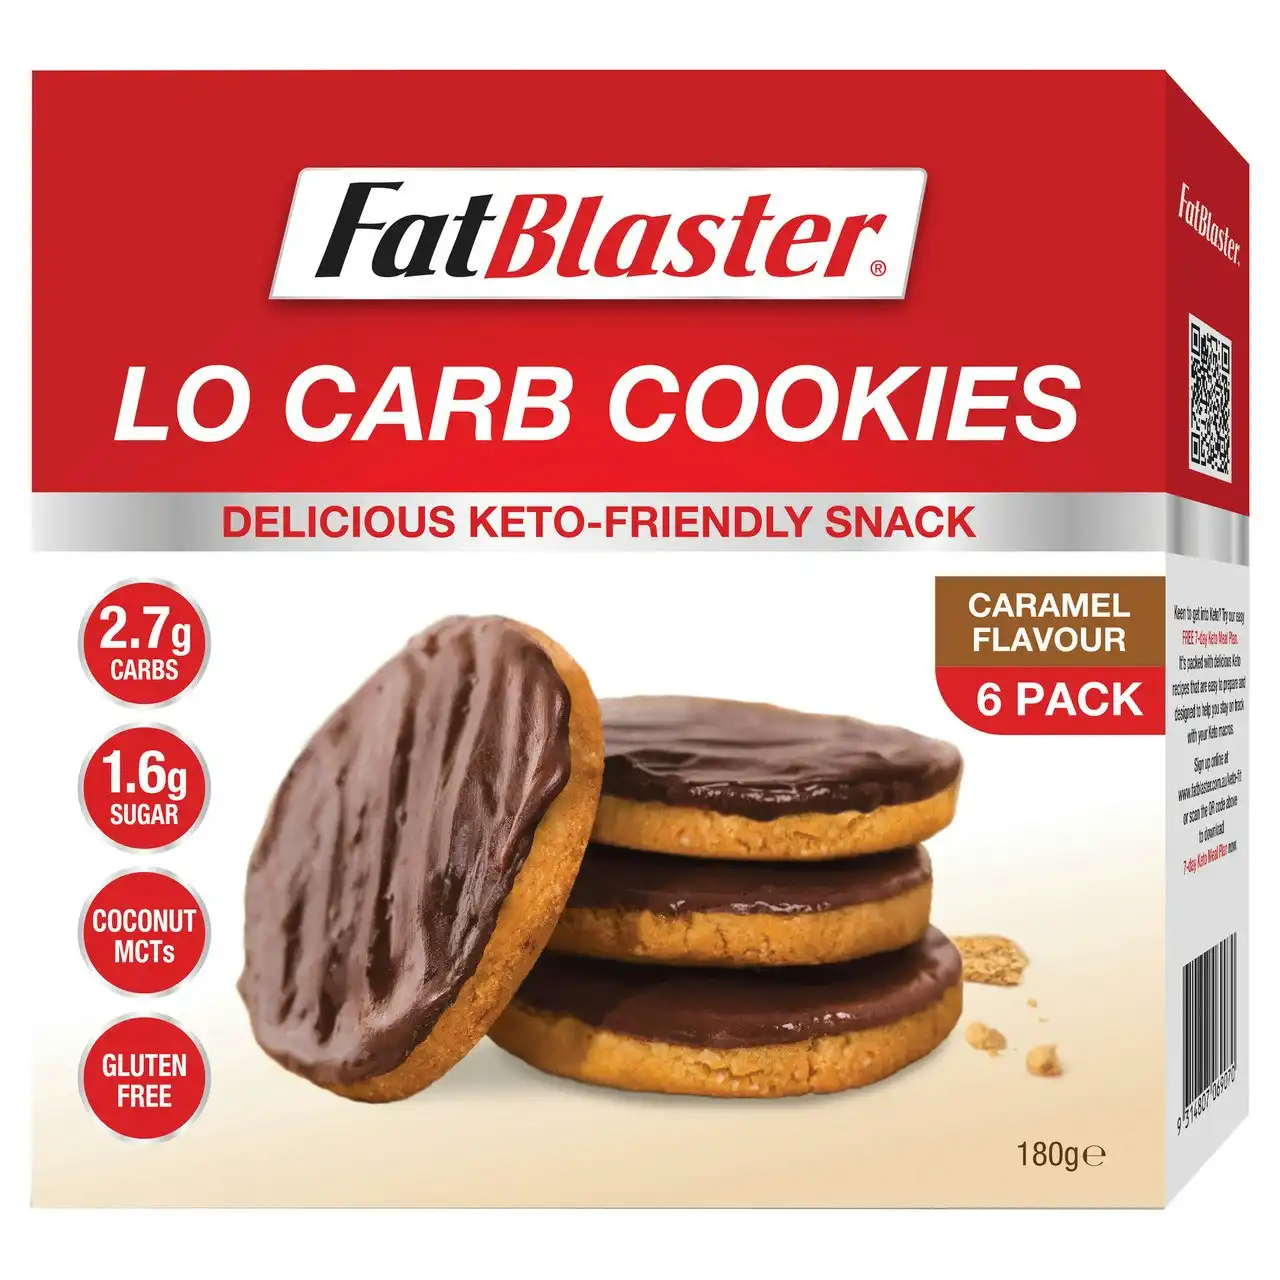 FatBlaster Lo Carb Cookie Caramel Flavour 6 x 30g Pack